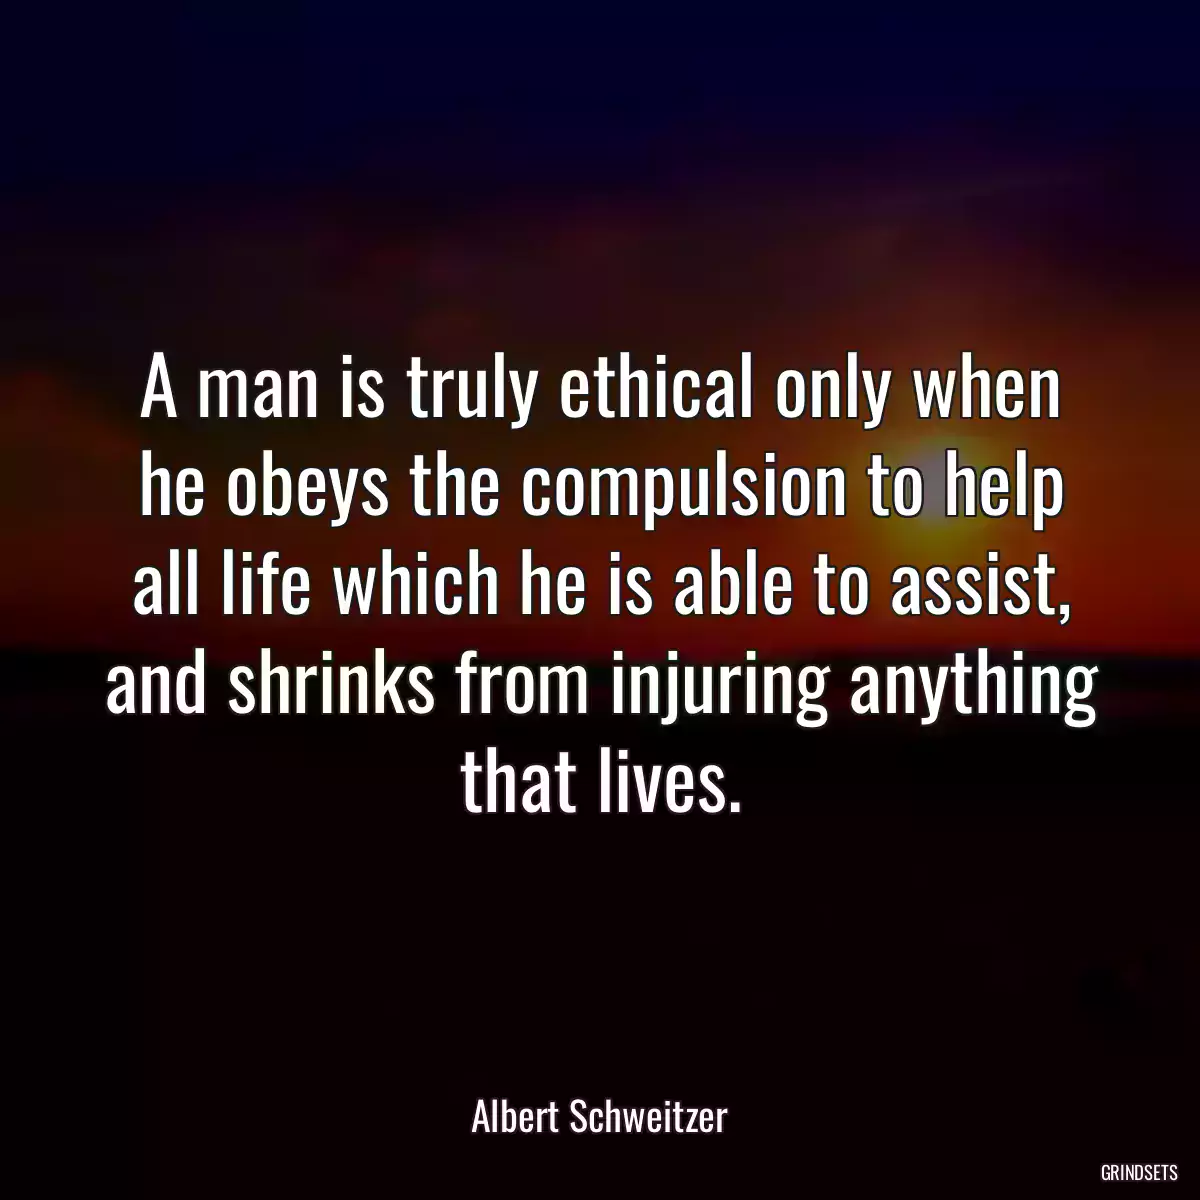 A man is truly ethical only when he obeys the compulsion to help all life which he is able to assist, and shrinks from injuring anything that lives.